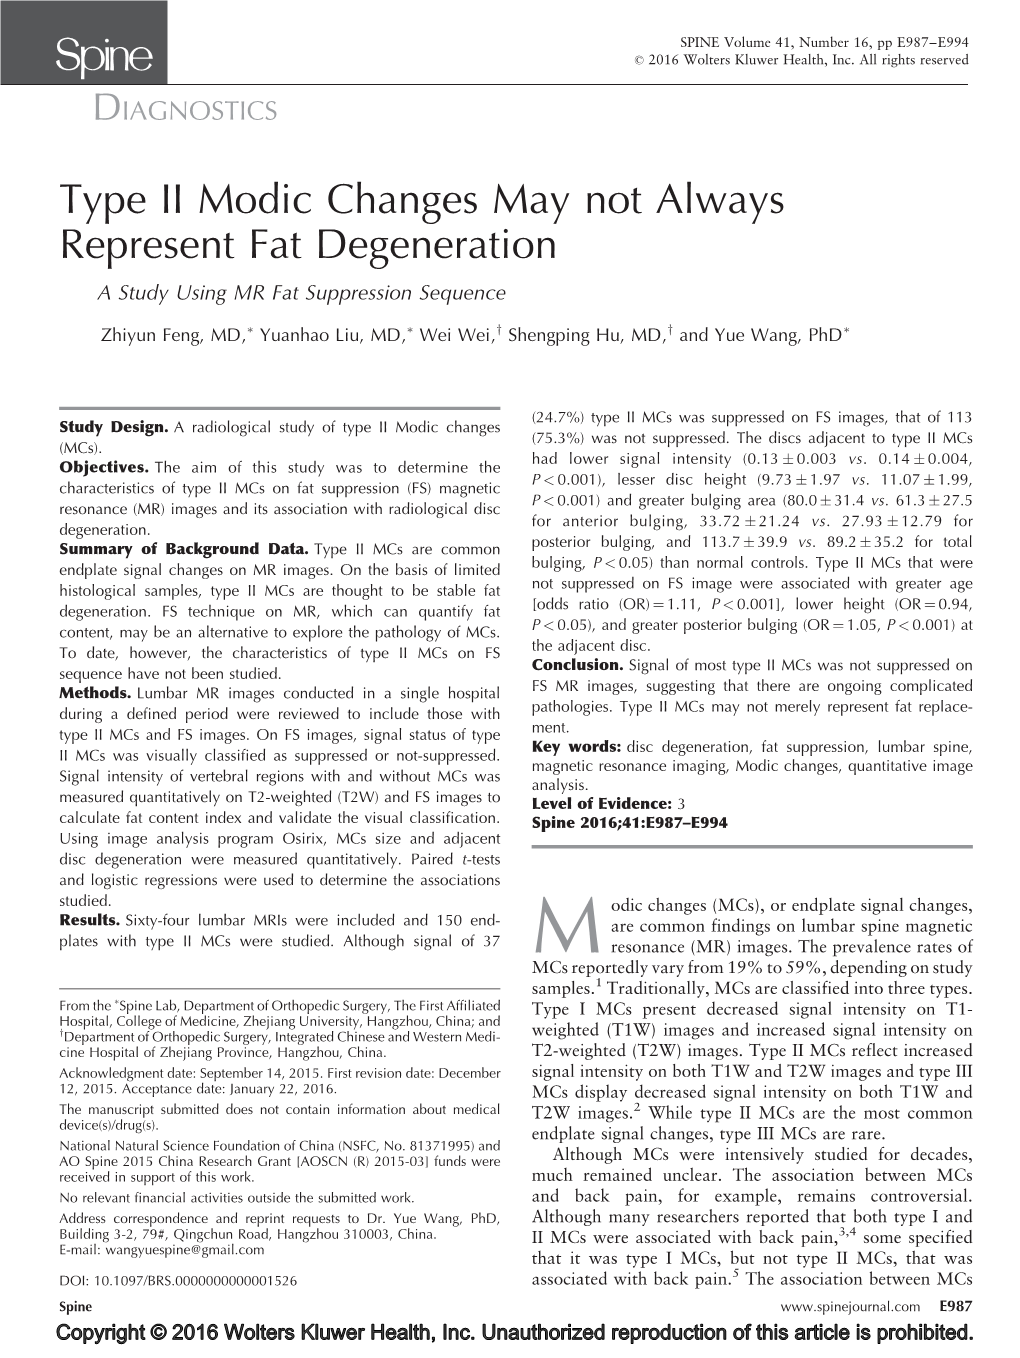 Type II Modic Changes May Not Always Represent Fat Degeneration a Study Using MR Fat Suppression Sequence